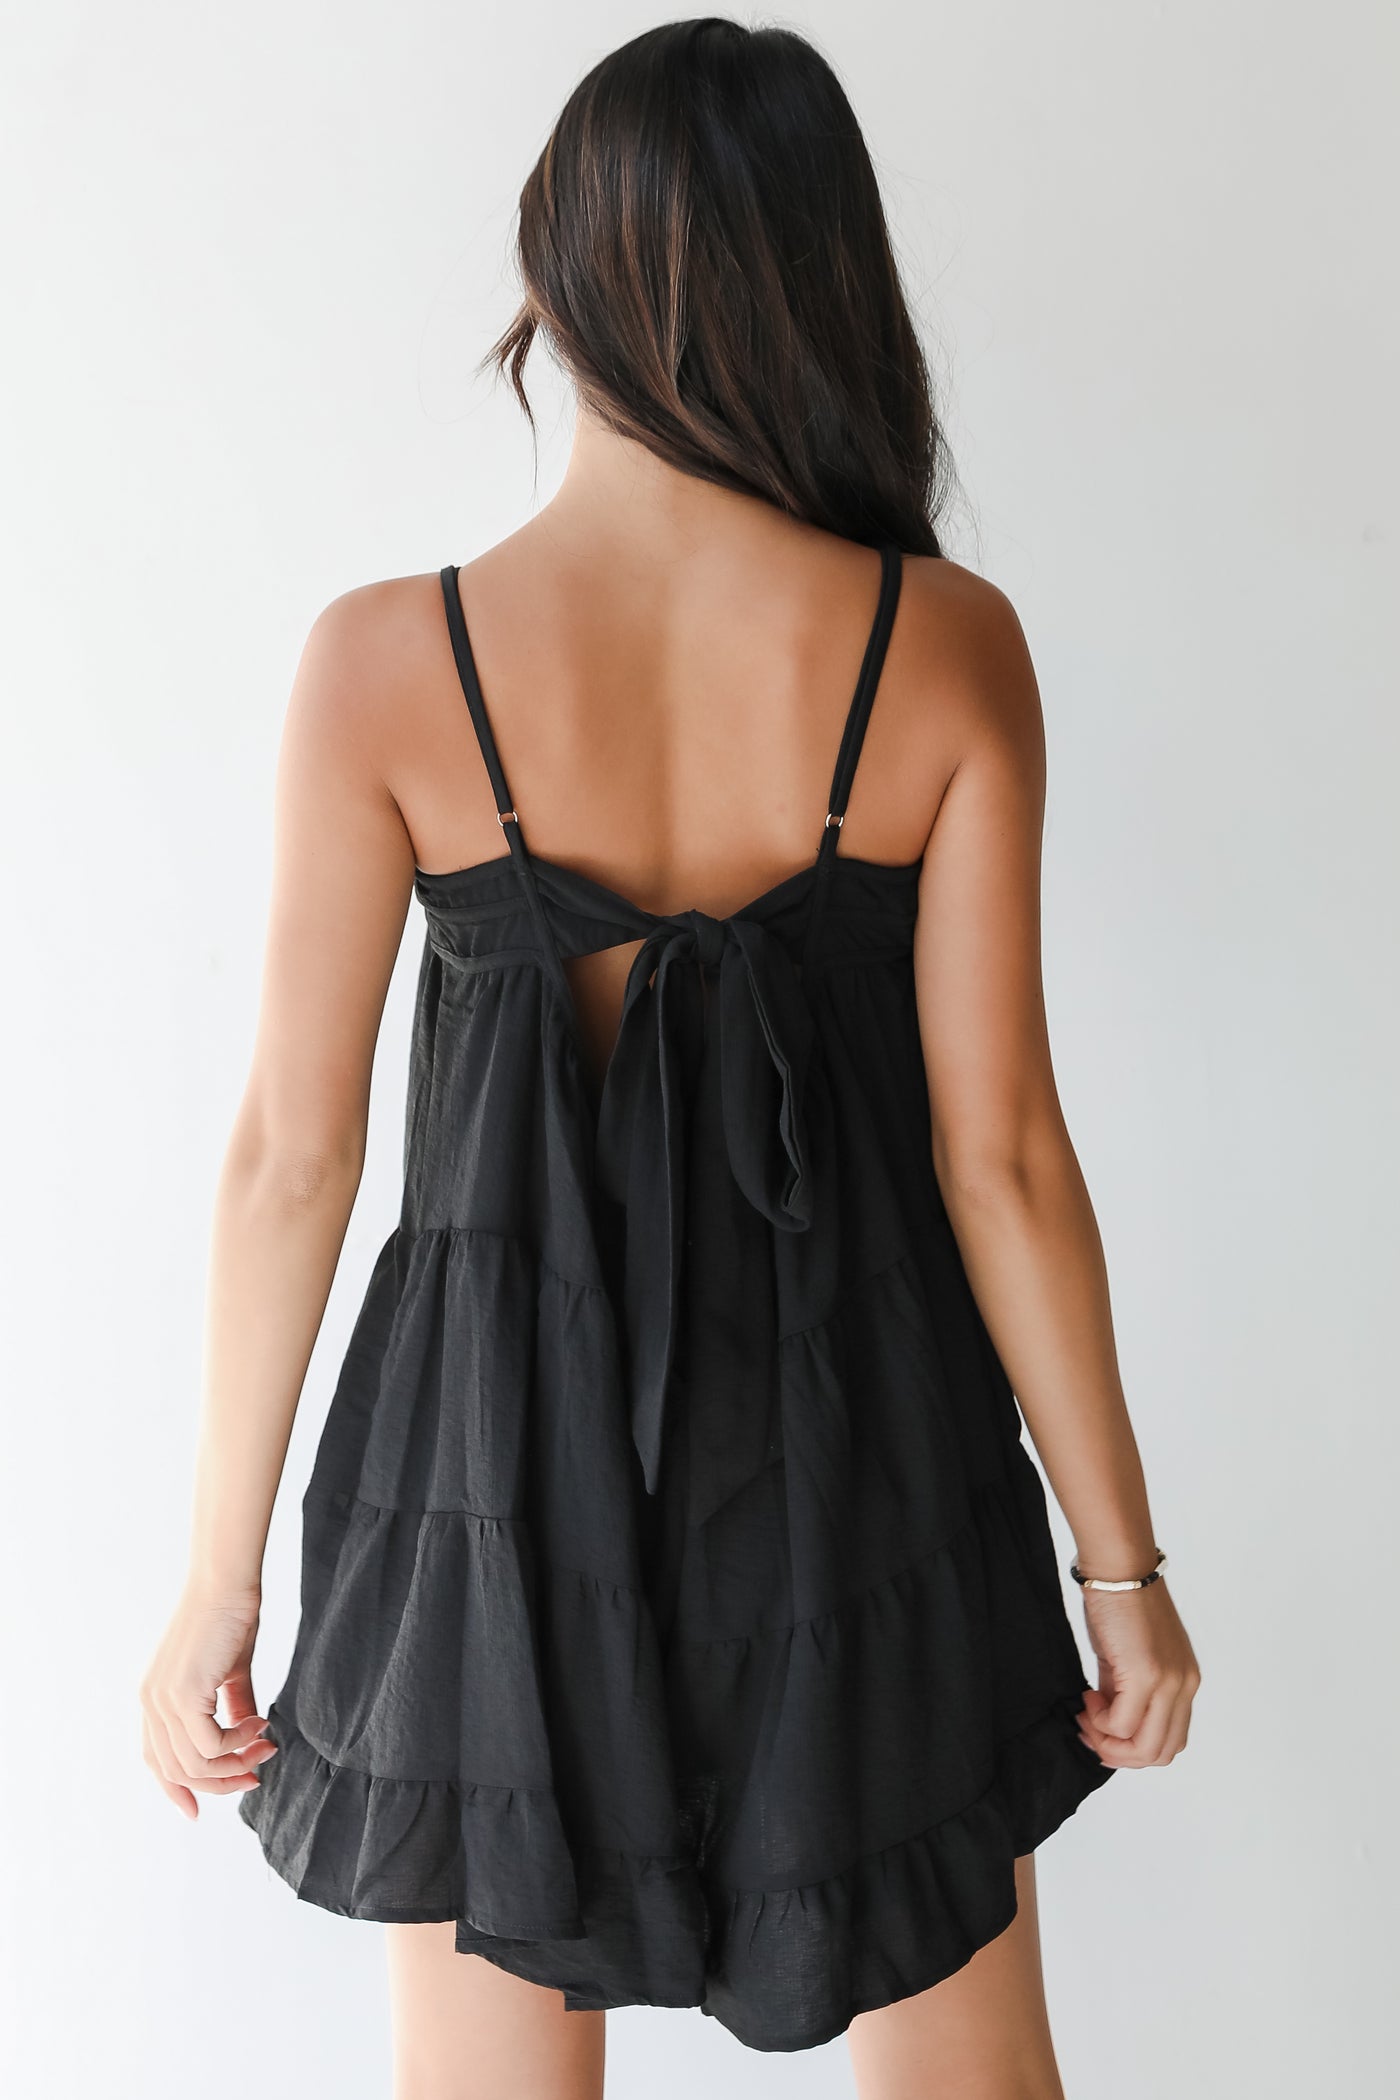 Tiered Romper from dress up